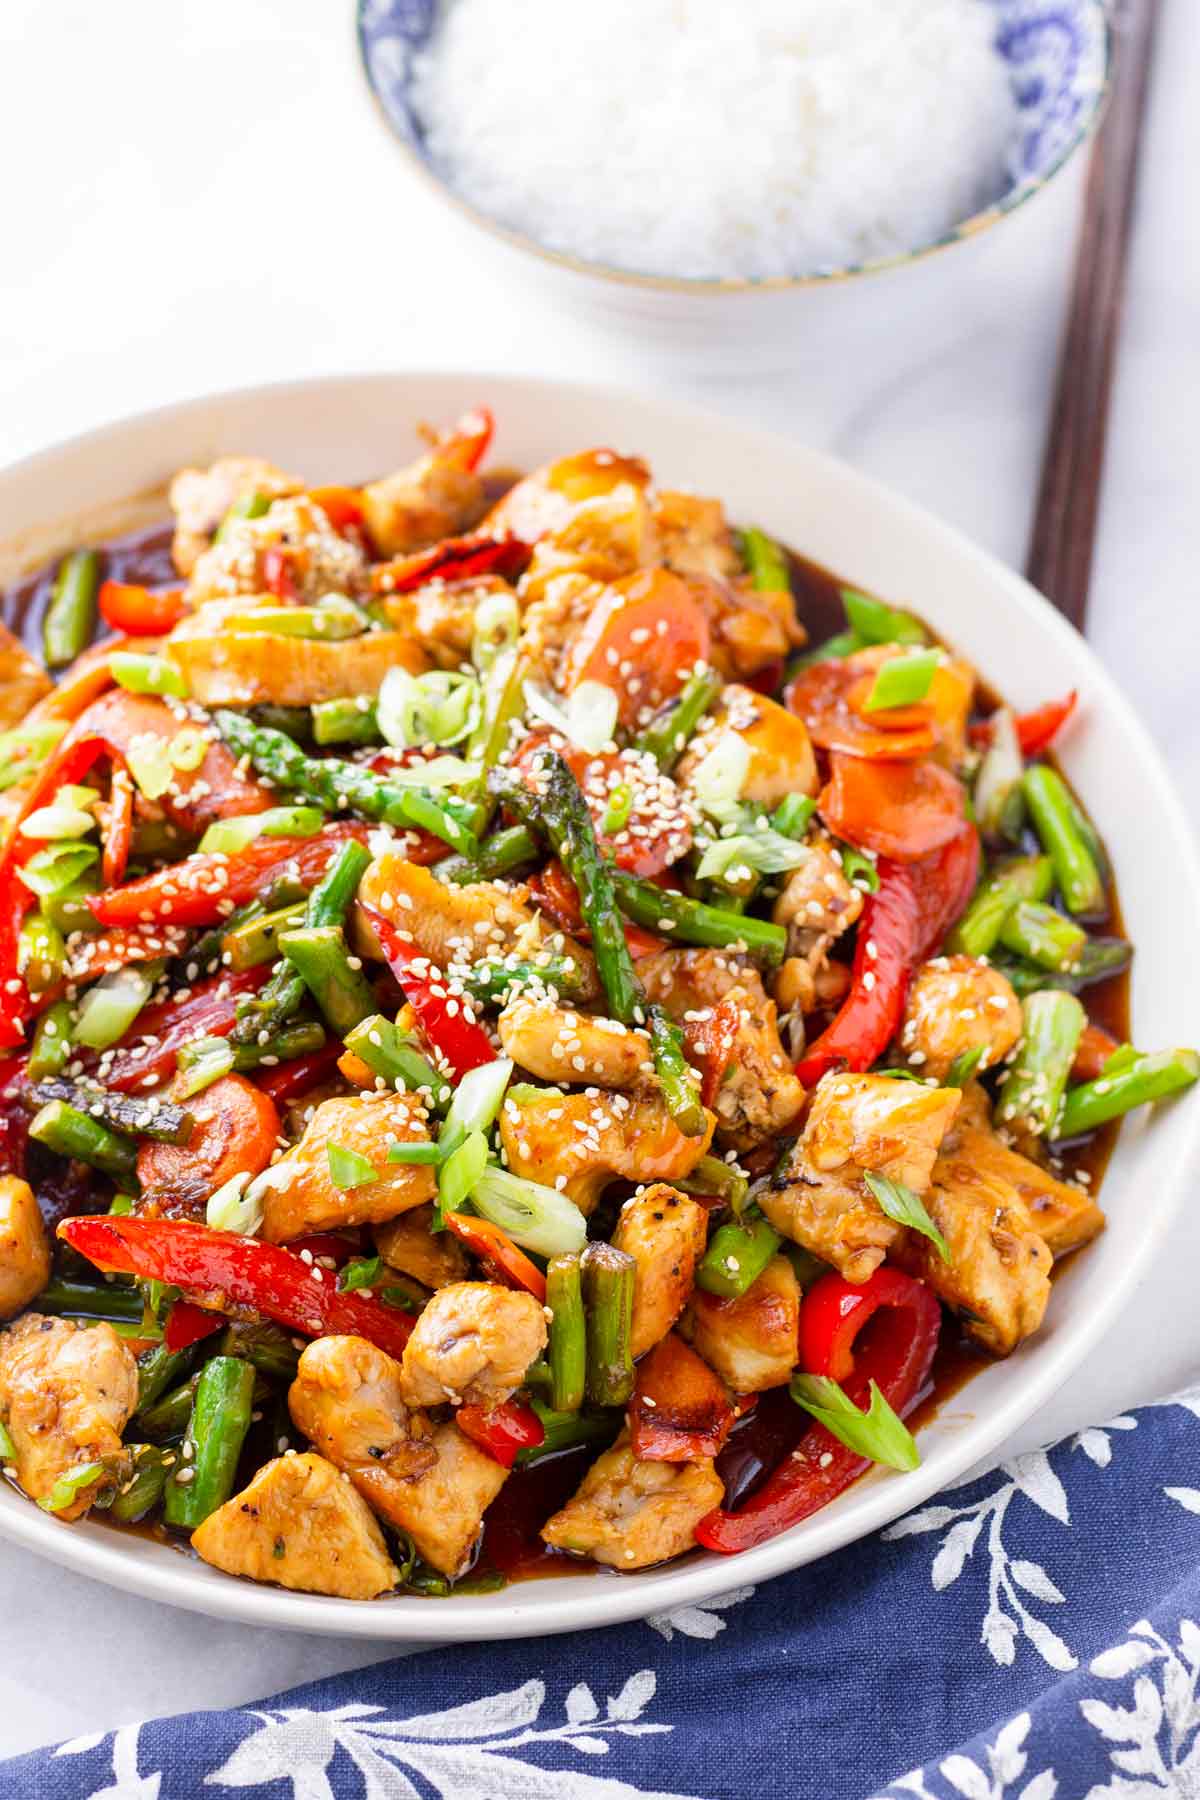 family style sized serving of chicken, asparagus, red bell peppers with sauce